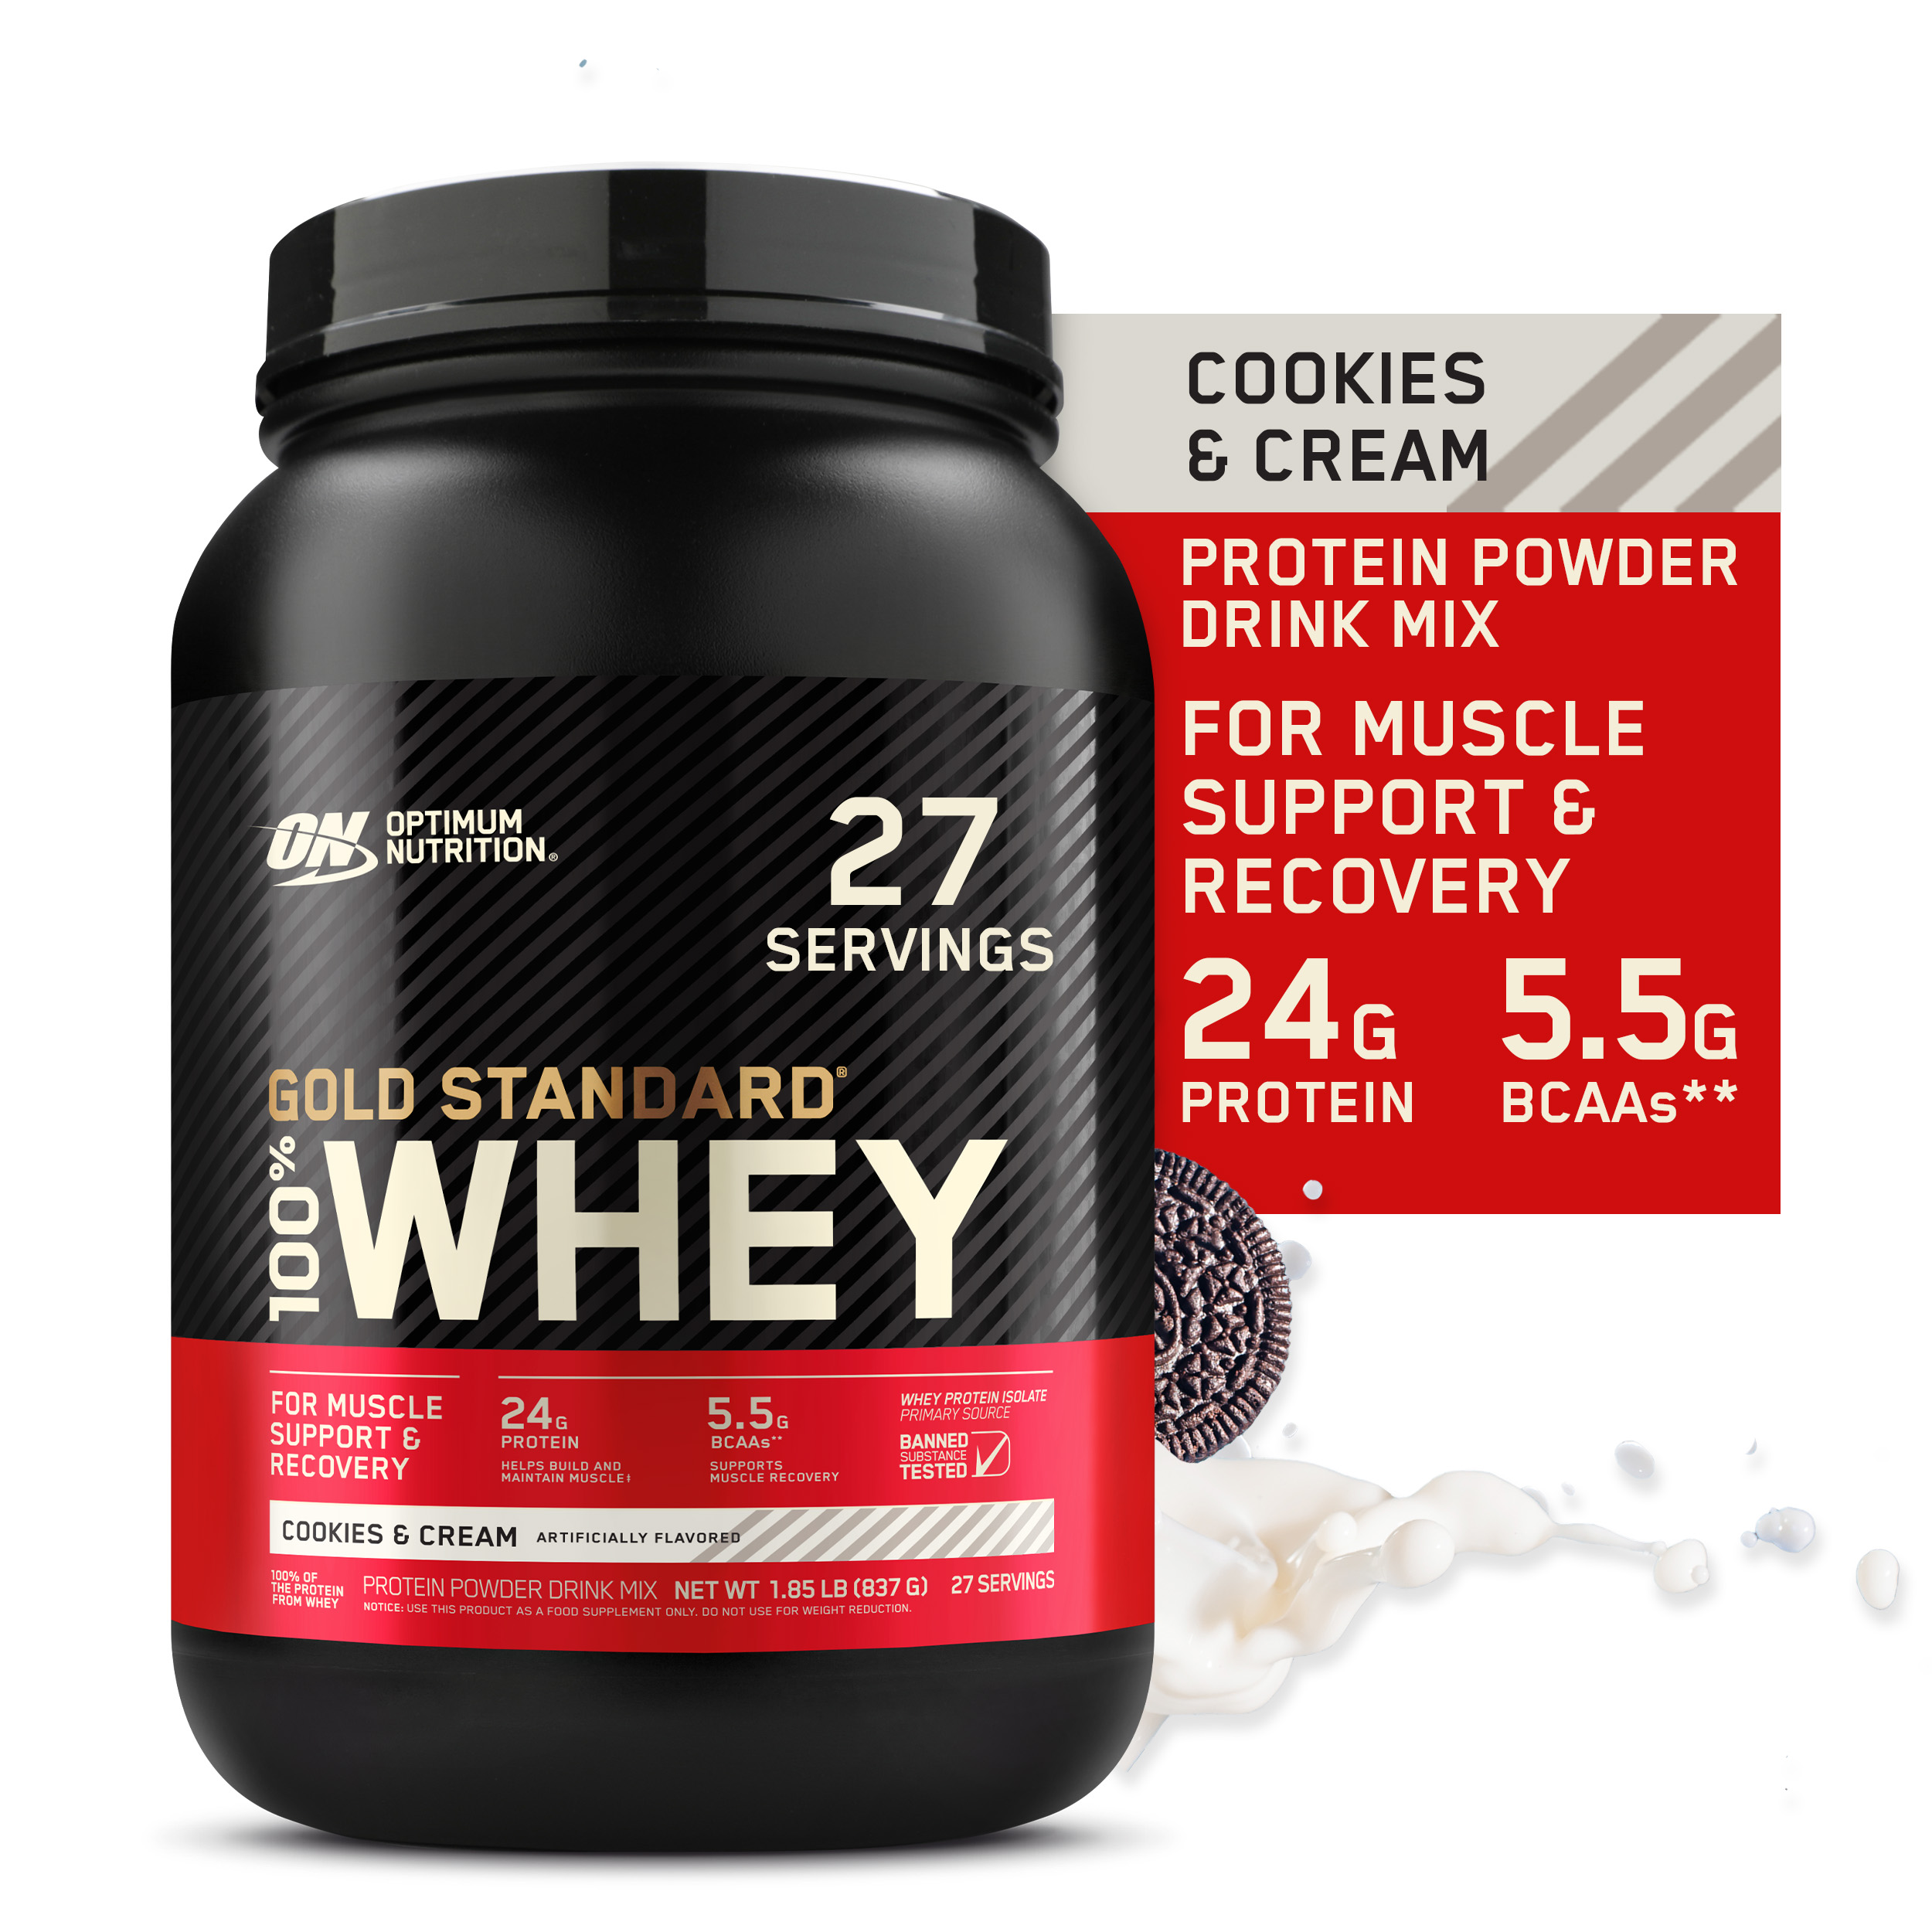 Optimum Nutrition, Gold Standard 100% Whey Protein Powder, 24 g Protein, Cookies & Cream, 1.85 lb, 27 Servings - image 1 of 11